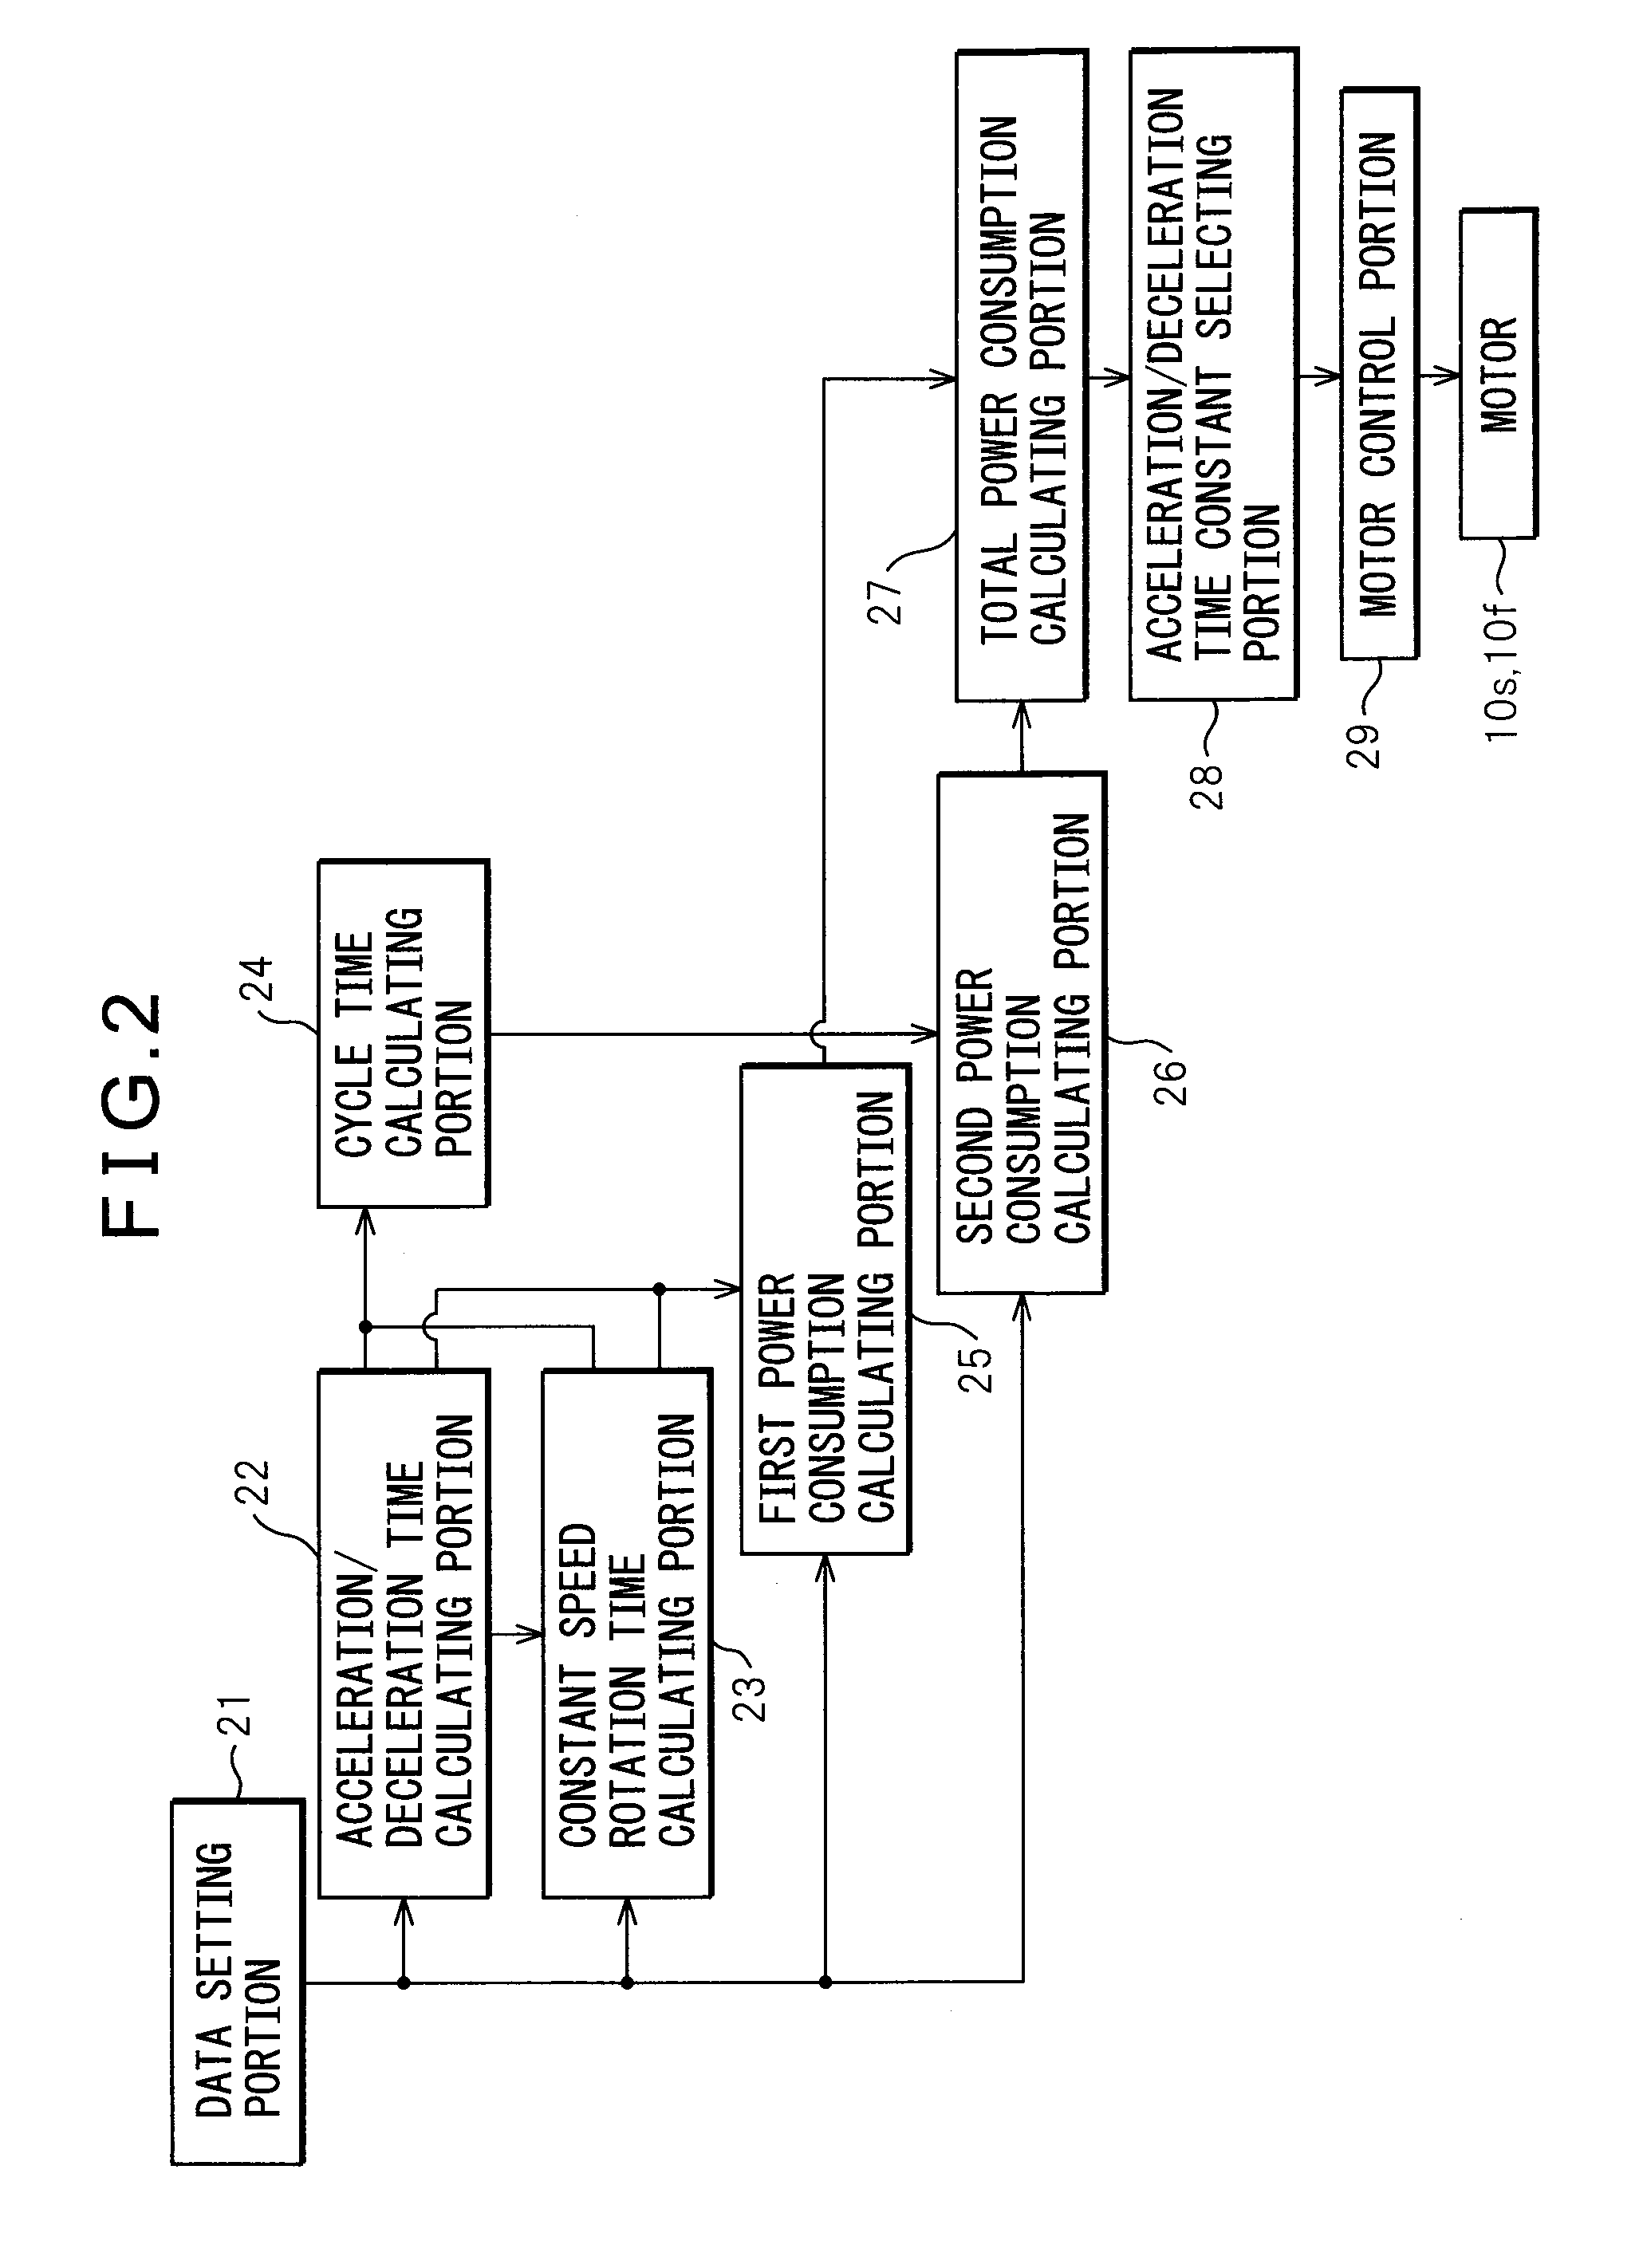 Control device for machine tool